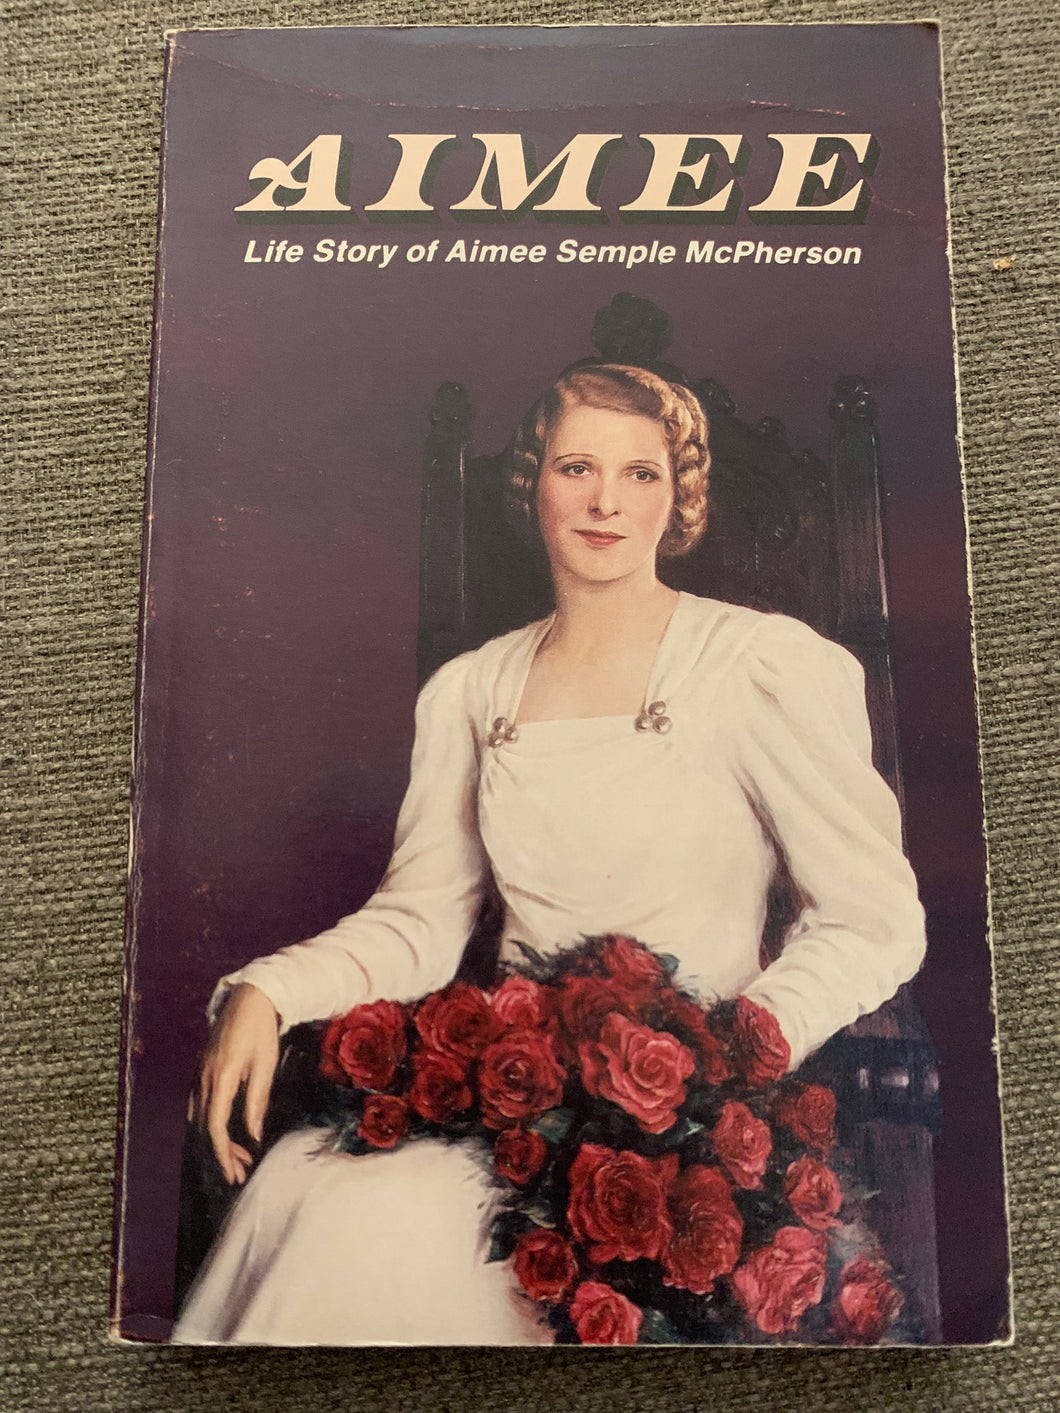 Aimee: Life Story of Aimee Semple McPherson by Aimee Semple McPherson